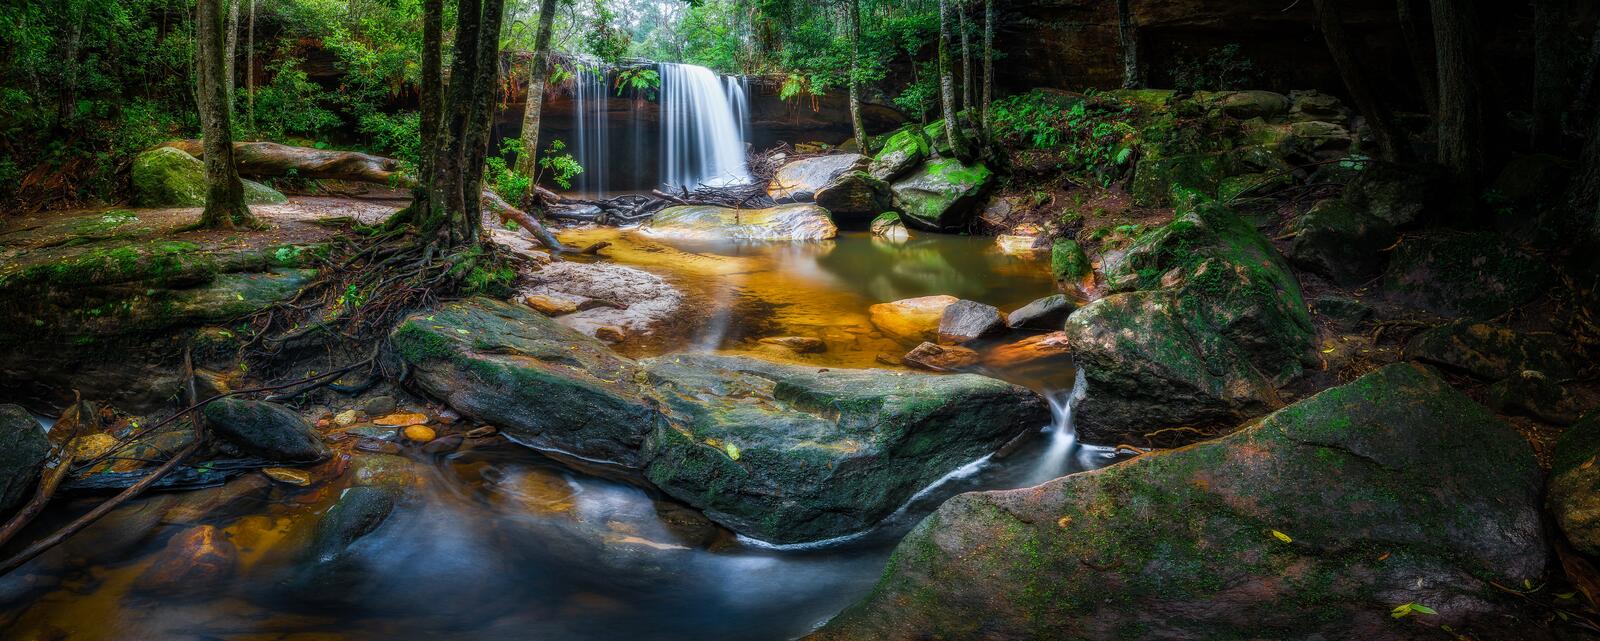 Free photo Download picture of waterfall, australia for free for your desktop